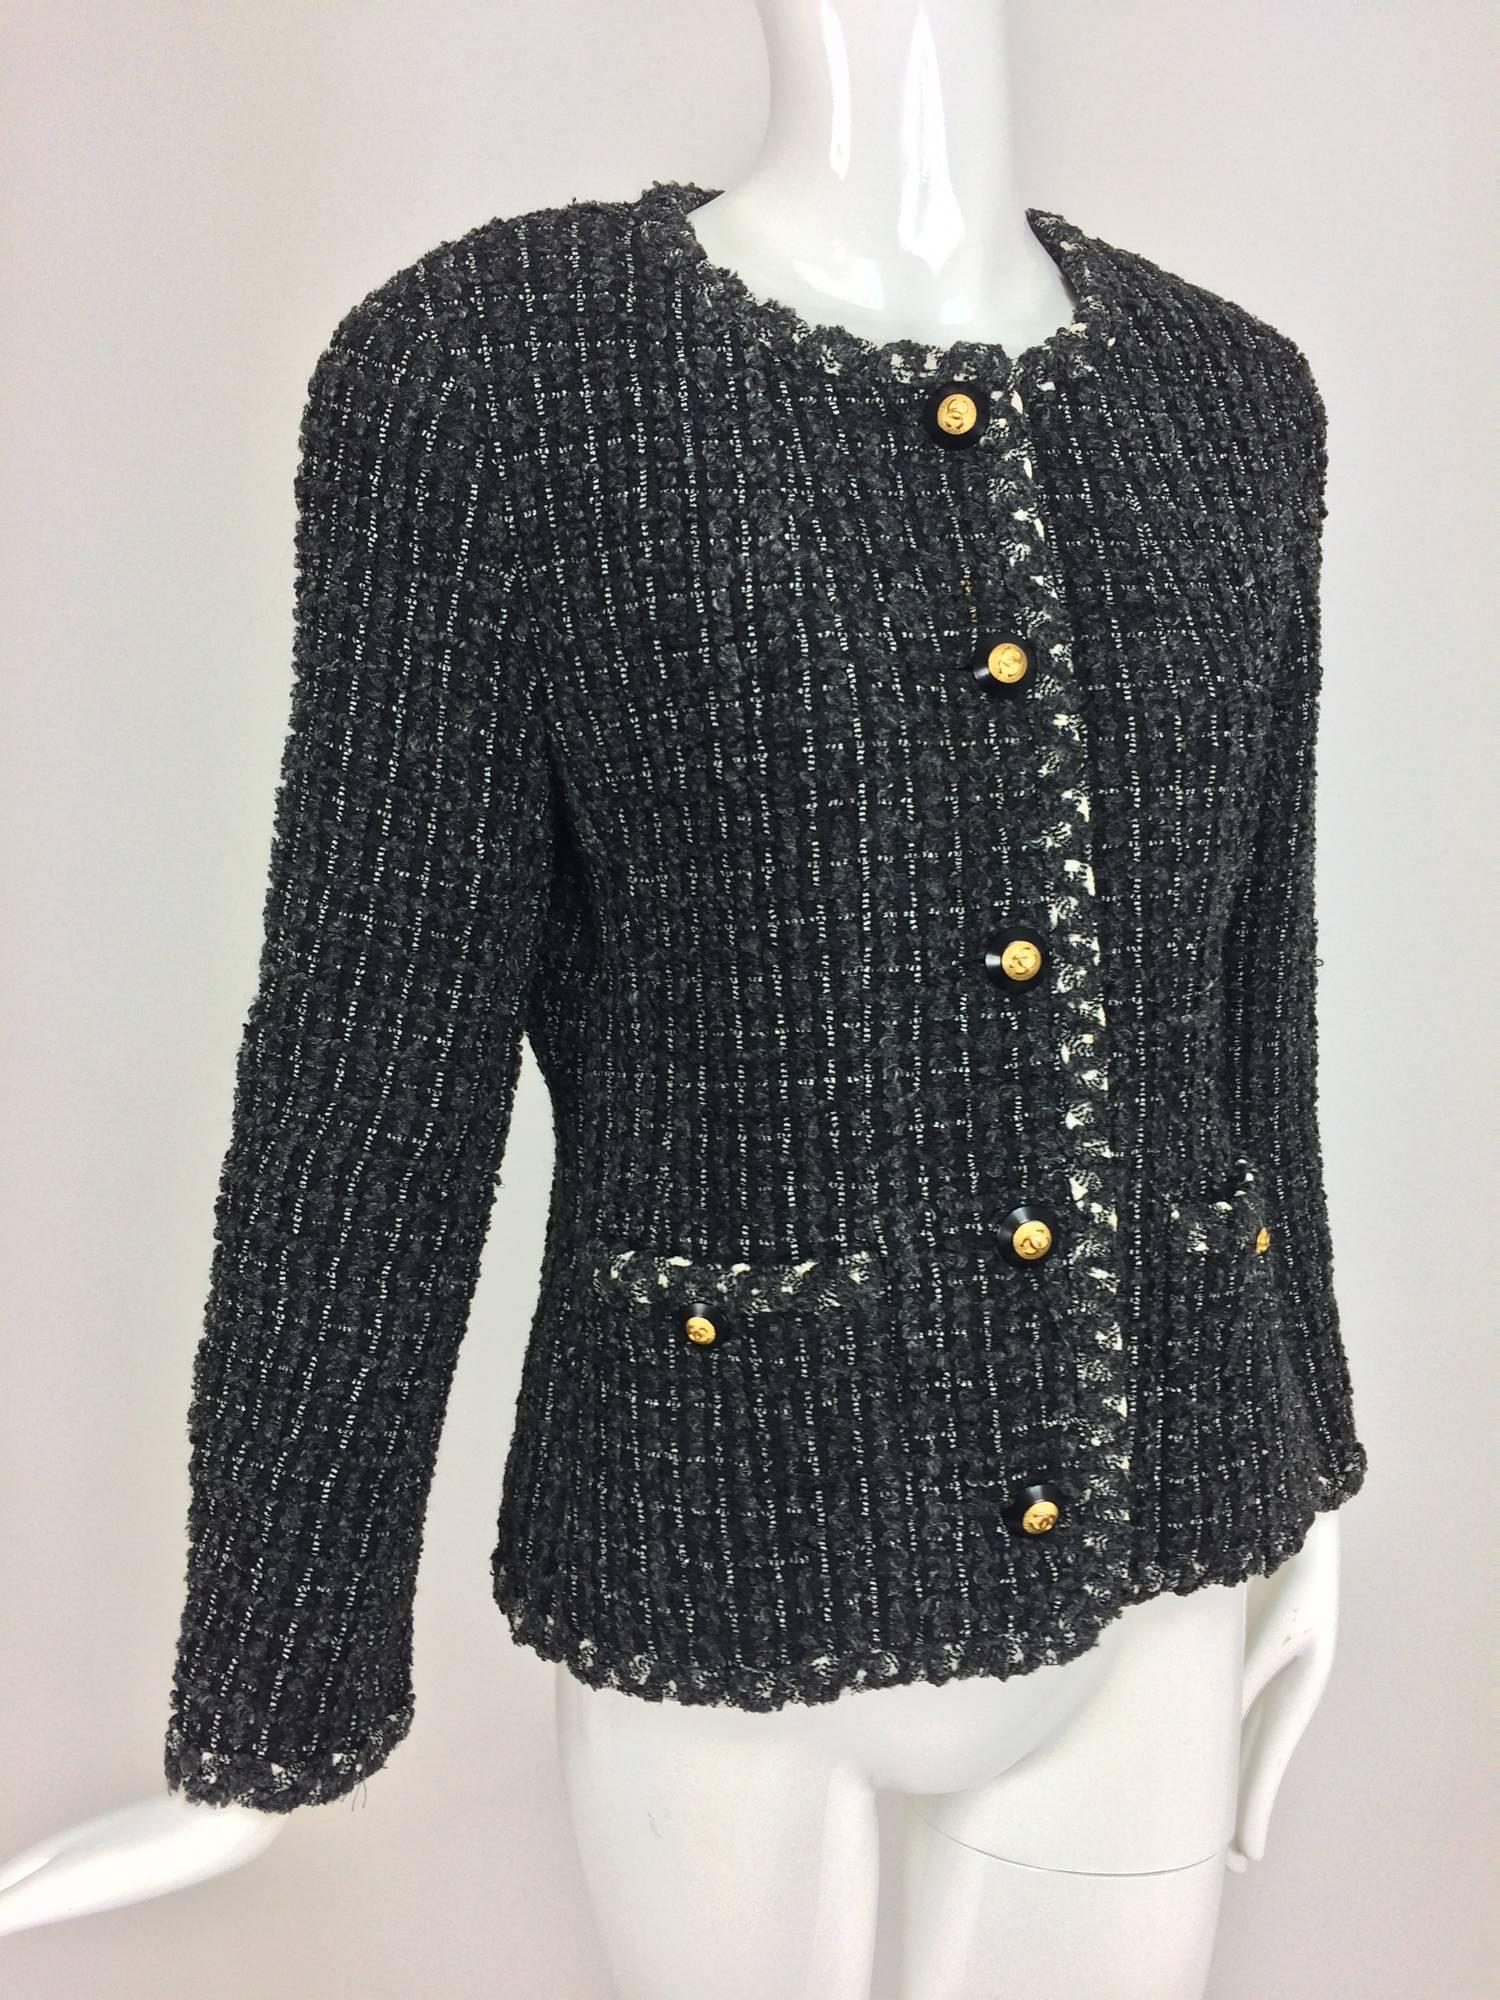 Chanel classic black grey cream tweed 2 pocket jacket 40 1993A...Jewel neck jacket has contrasting trim...slightly tapered at the waist...Wool and cotton chenille tweed...Hip front pockets with gold and black Chanel logo buttons...Fully lined in